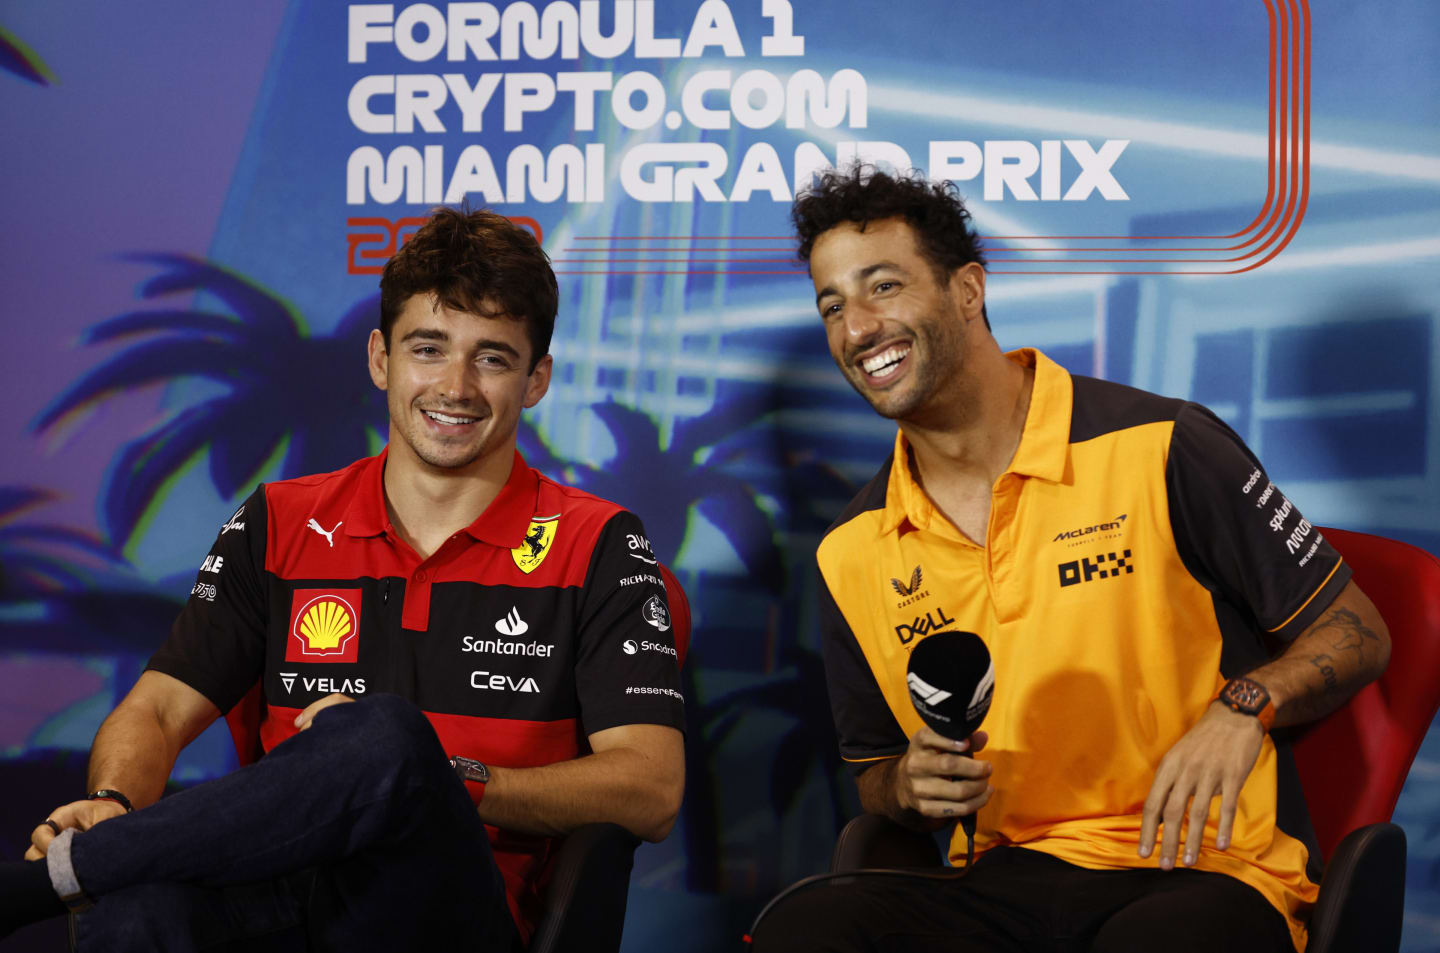 MIAMI, FLORIDA - MAY 06: Charles Leclerc of Monaco and Ferrari and Daniel Ricciardo of Australia and McLaren smile in the Drivers Press Conference prior to practice ahead of the F1 Grand Prix of Miami at the Miami International Autodrome on May 06, 2022 in Miami, Florida. (Photo by Jared C. Tilton/Getty Images)